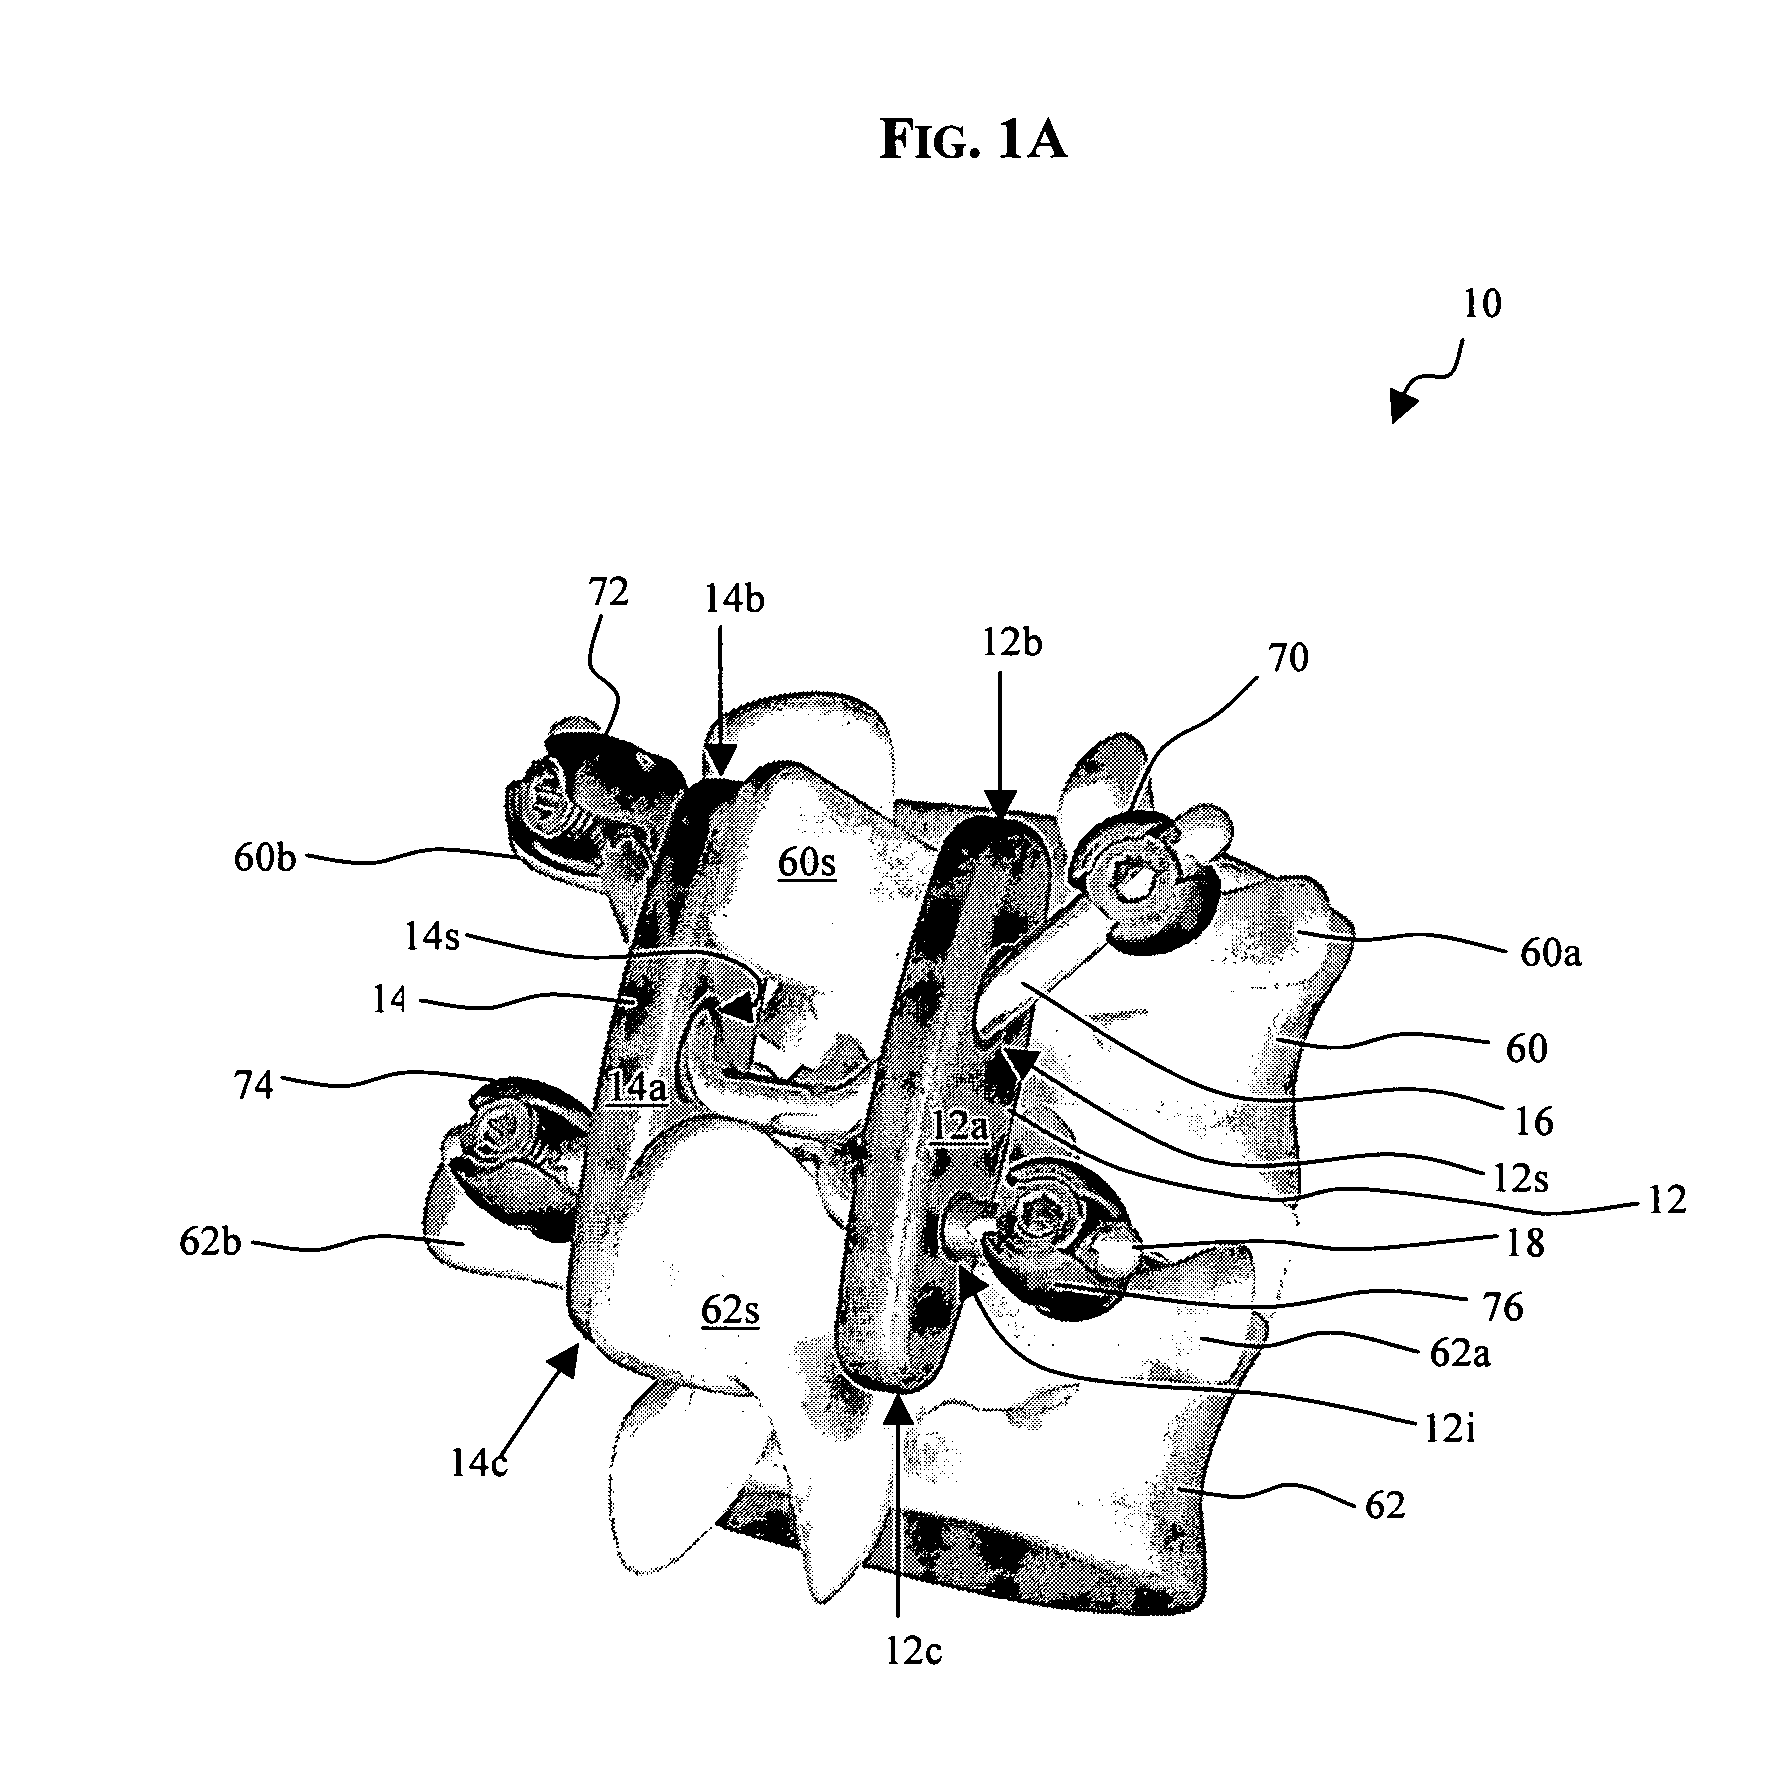 Posterior stabilization systems and methods